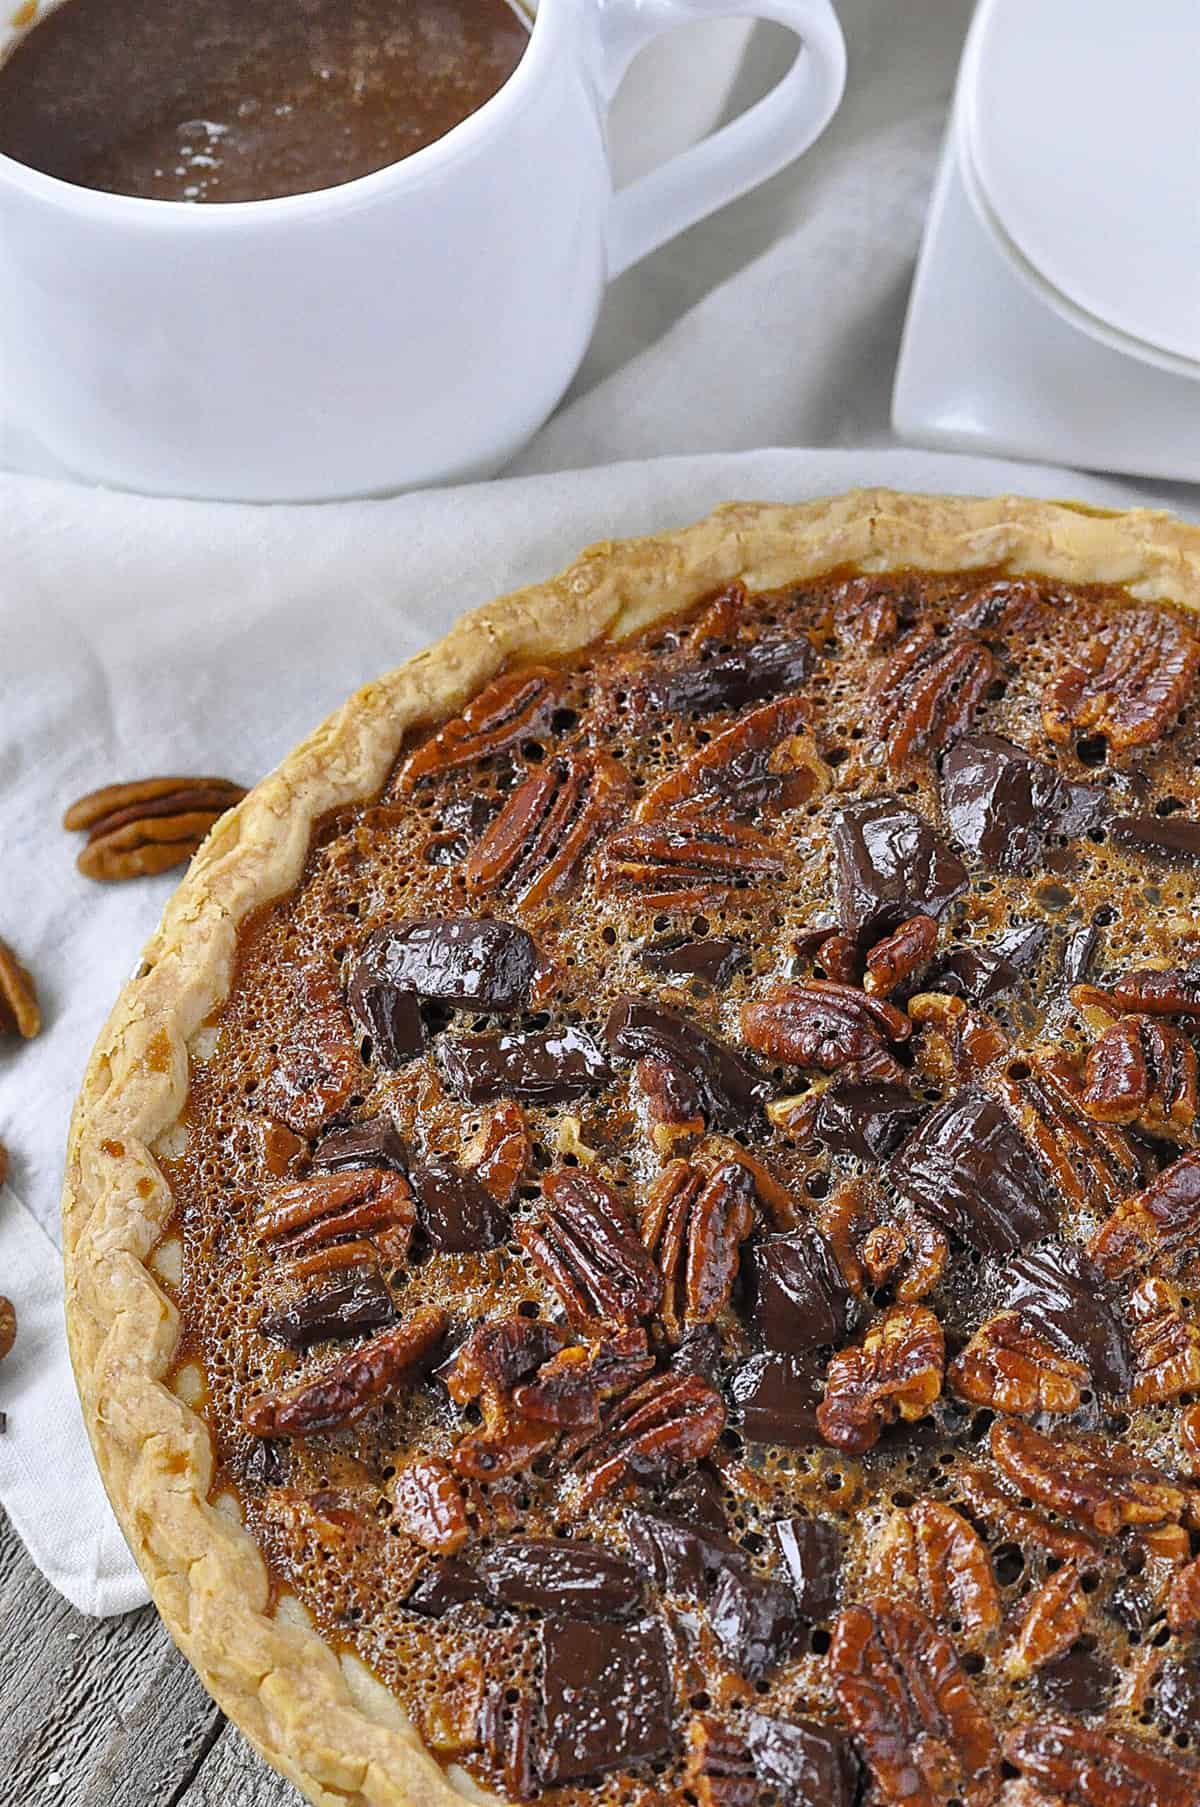 CHOCOLATE PECAN PIE OUT OF THE OVEN